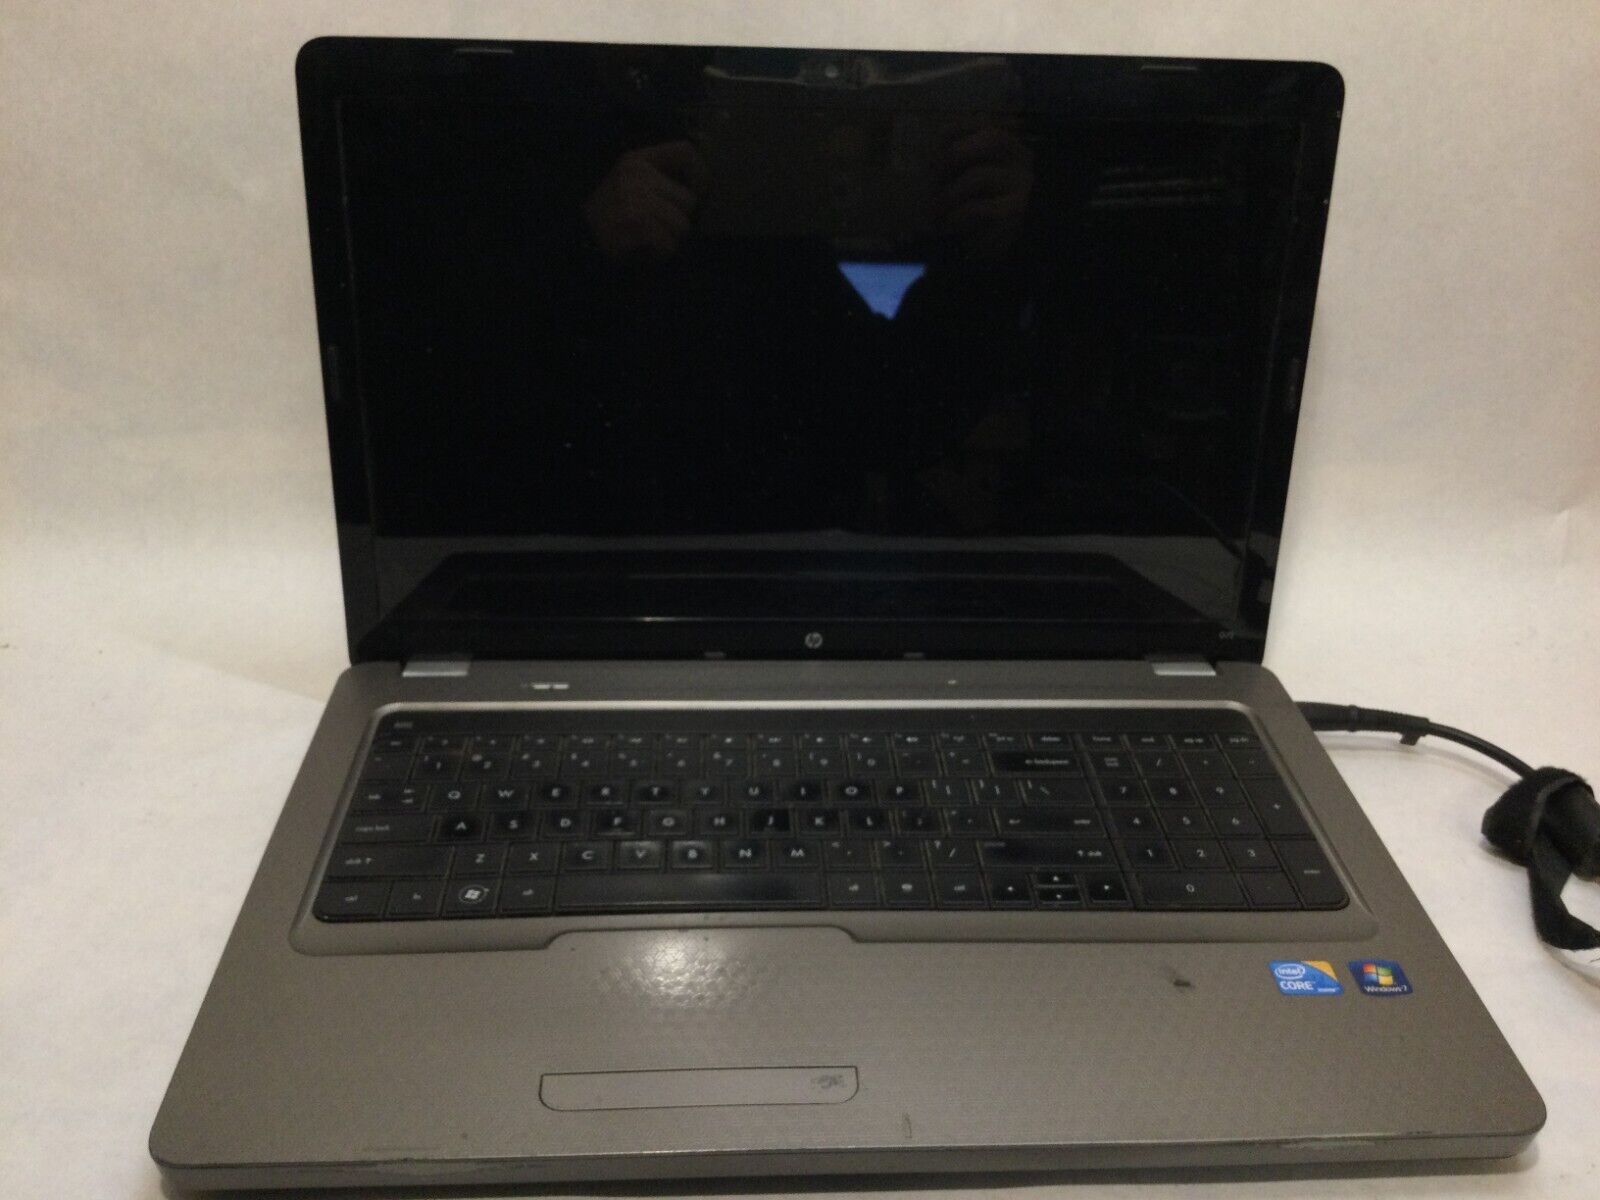 HP G72-260US 17.3” / Intel Core i3 UNKNOWN SPECS / (DOES NOT POWER ON) -MR